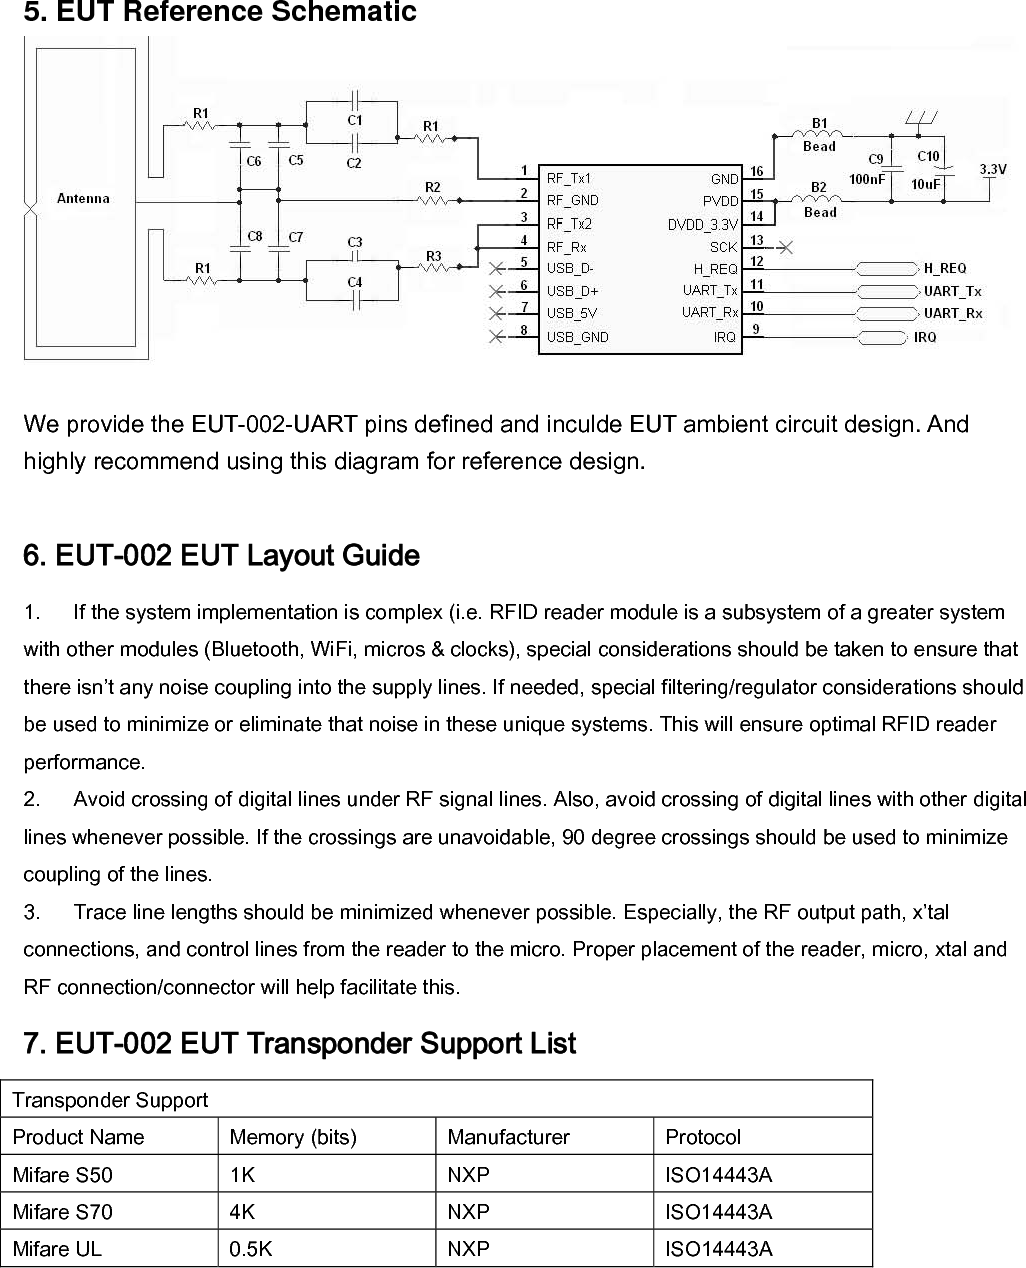 5. EUT Reference Schematic We provide the EUT-002-UART pins defined and inculde EUT ambient circuit design. And highly recommend using this diagram for reference design.  6. EUT-002 EUT Layout Guide 1. If the system implementation is complex (i.e. RFID reader module is a subsystem of a greater system with other modules (Bluetooth, WiFi, micros &amp; clocks), special considerations should be taken to ensure that there isn’t any noise coupling into the supply lines. If needed, special filtering/regulator considerations should be used to minimize or eliminate that noise in these unique systems. This will ensure optimal RFID reader performance. 2. Avoid crossing of digital lines under RF signal lines. Also, avoid crossing of digital lines with other digital lines whenever possible. If the crossings are unavoidable, 90 degree crossings should be used to minimize coupling of the lines. 3. Trace line lengths should be minimized whenever possible. Especially, the RF output path, x’tal connections, and control lines from the reader to the micro. Proper placement of the reader, micro, xtal and RF connection/connector will help facilitate this. 7. EUT-002 EUT Transponder Support List Transponder Support Product Name  Memory (bits)  Manufacturer  Protocol Mifare S50  1K  NXP  ISO14443A Mifare S70  4K  NXP  ISO14443A Mifare UL  0.5K  NXP  ISO14443A  